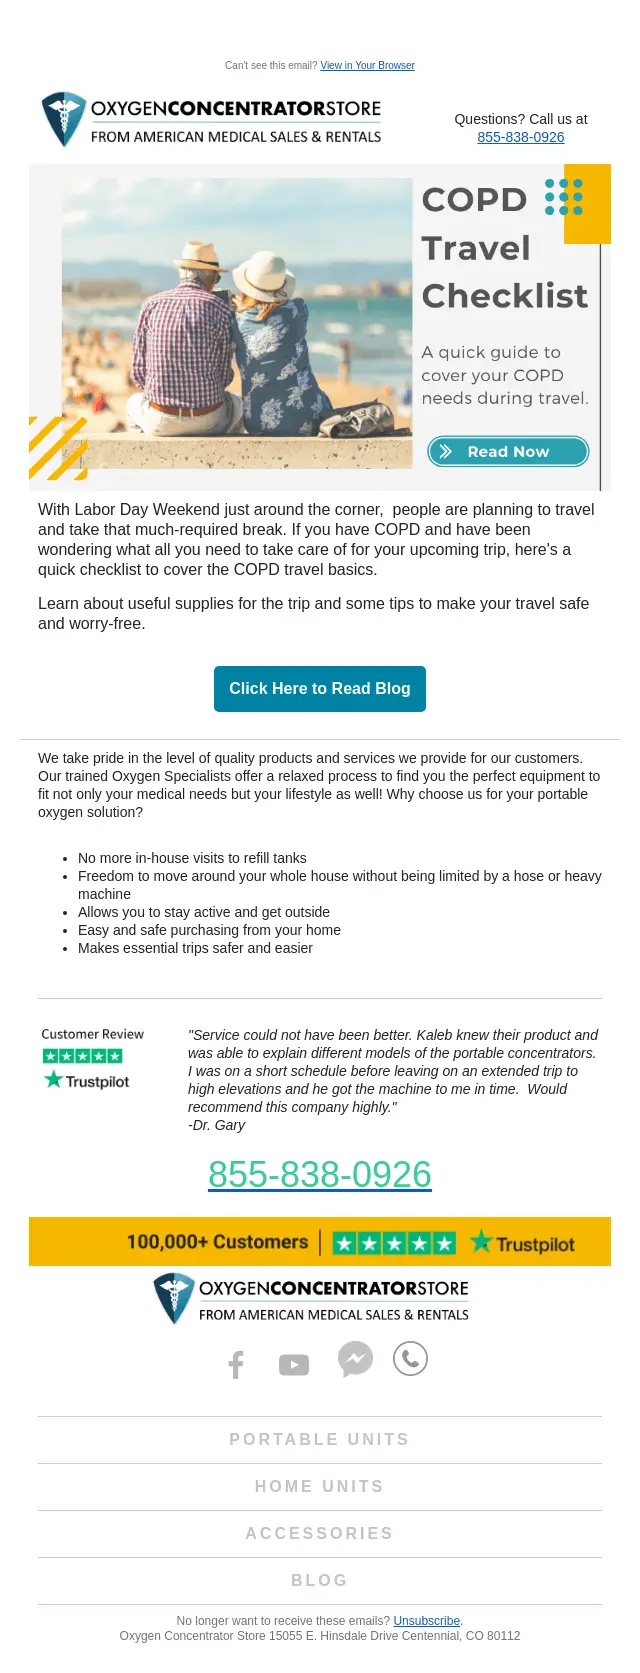 Image shows a marketing email from the Oxygen Concentrator Store